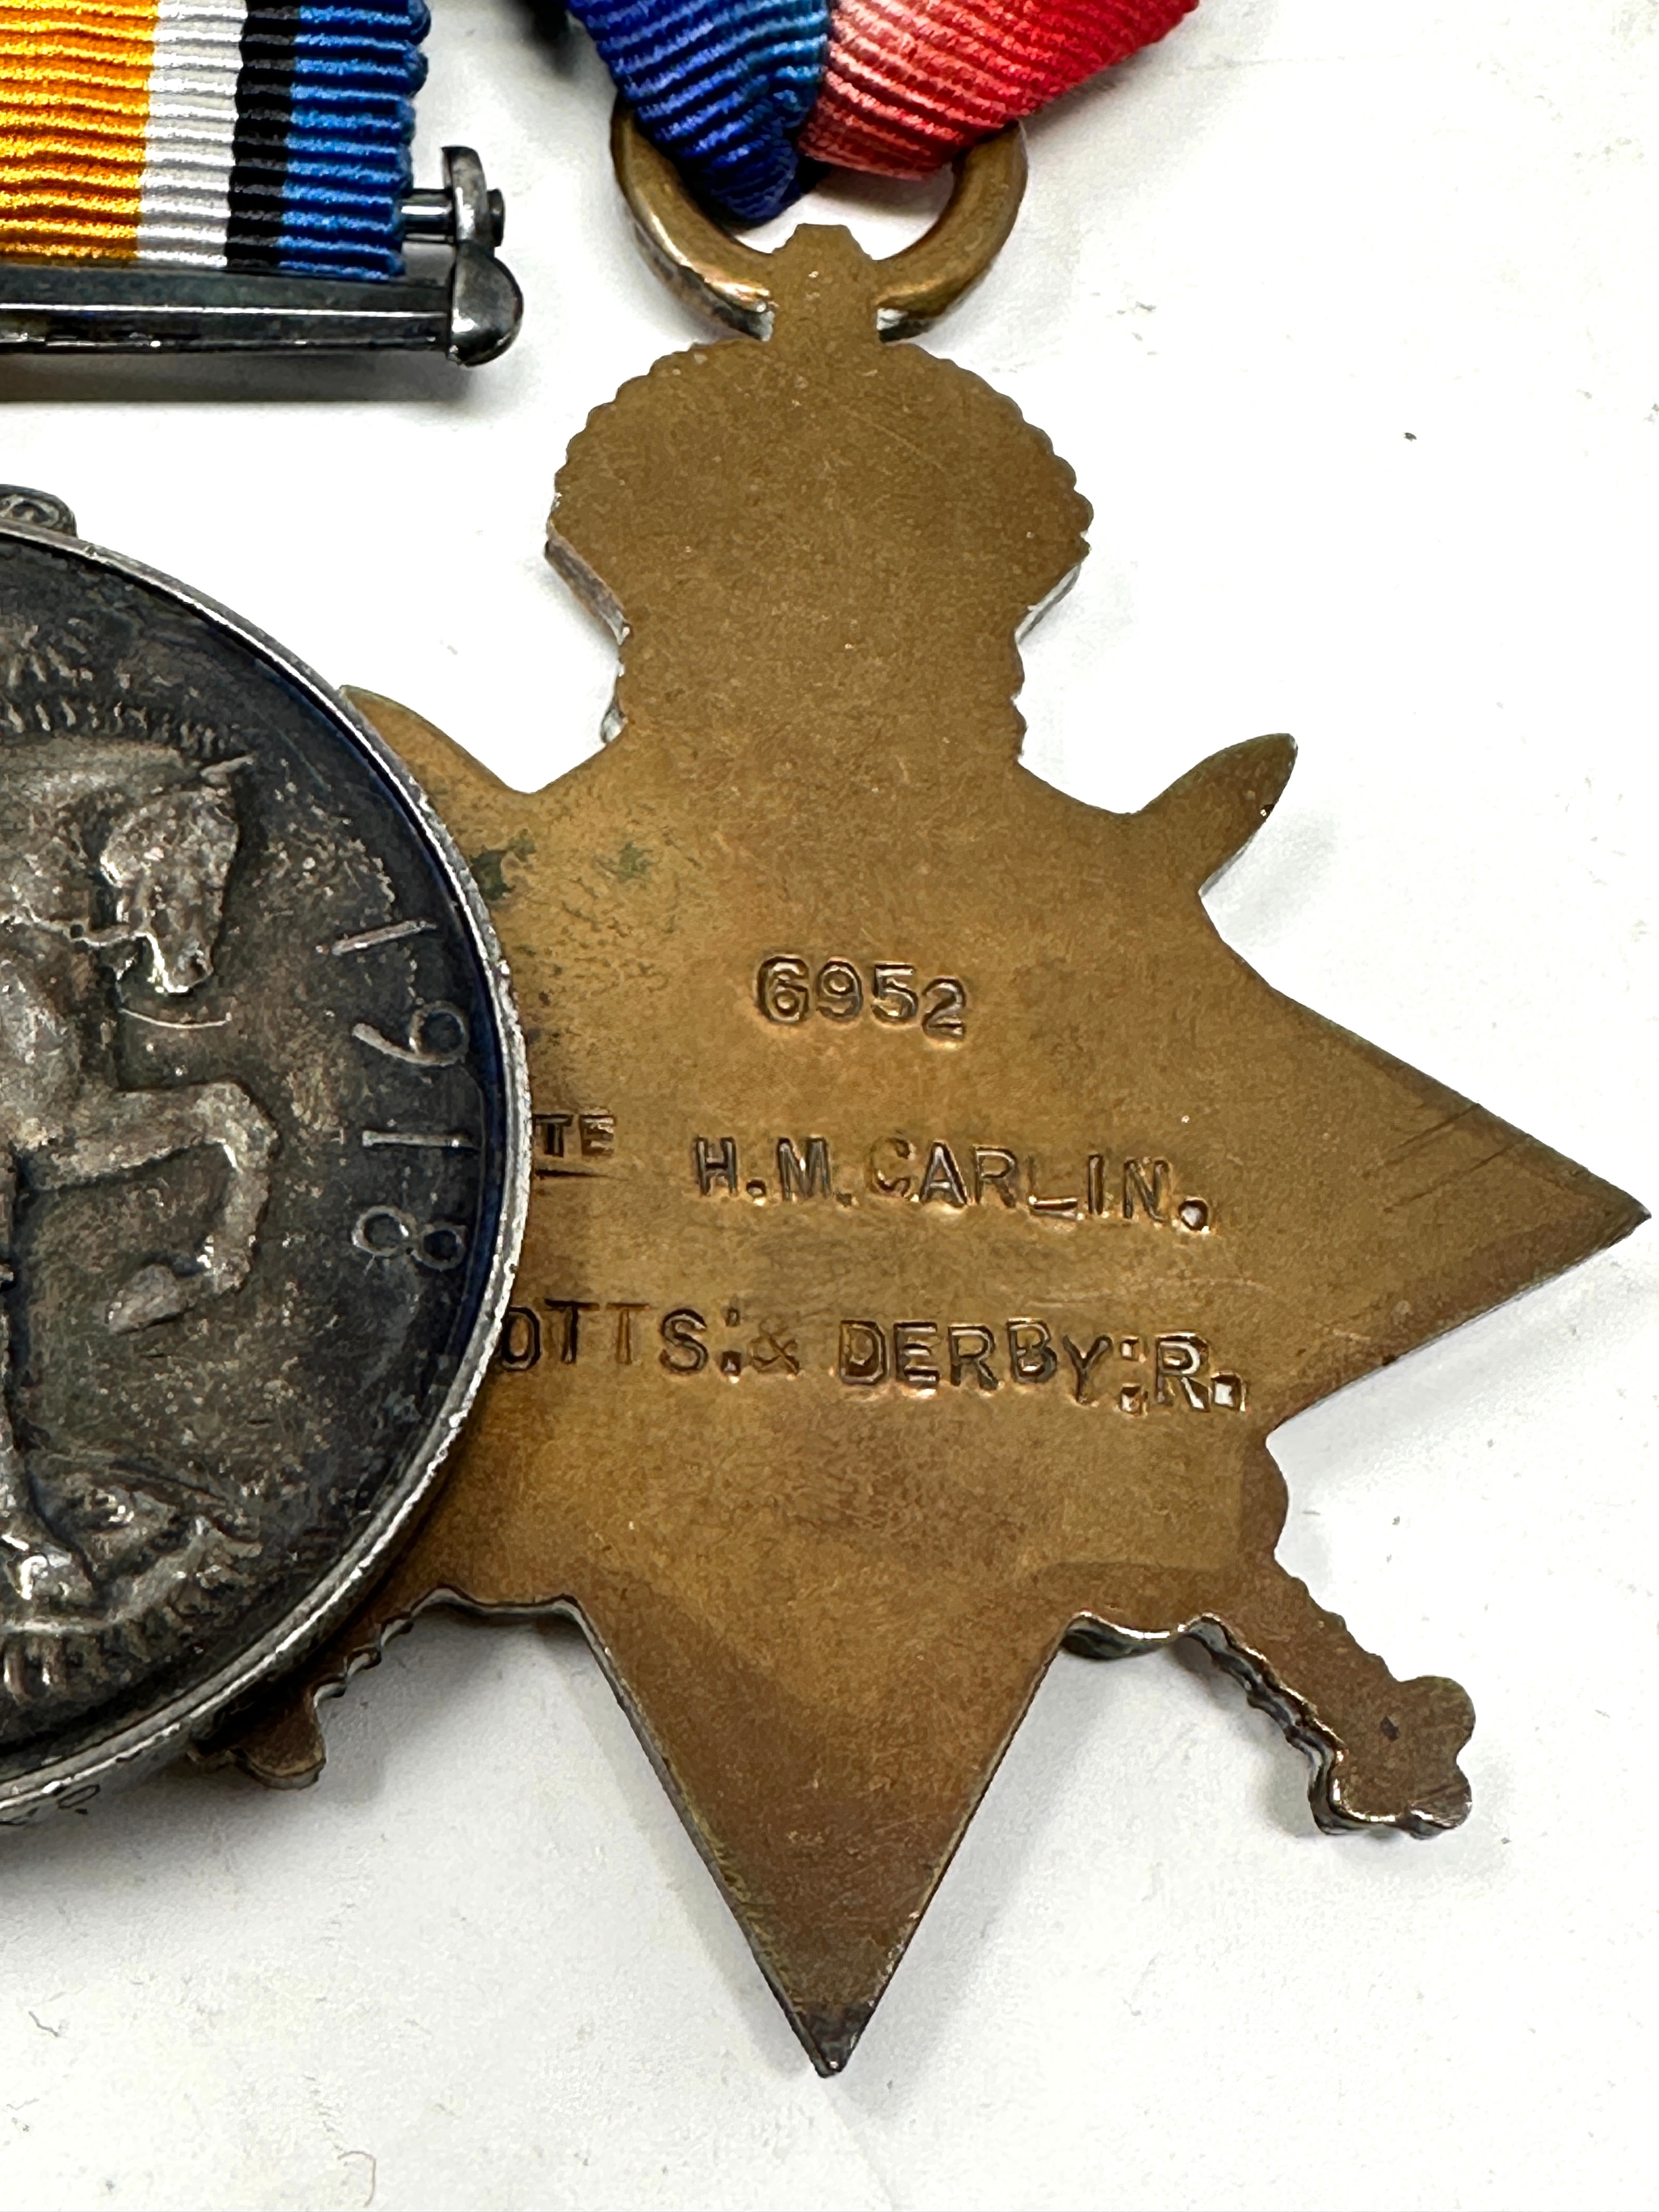 ww1 -ww2 mounted medal group to 240865 sjt m carlin notts & derby star named 6952 pte h.m carlin - Image 3 of 4